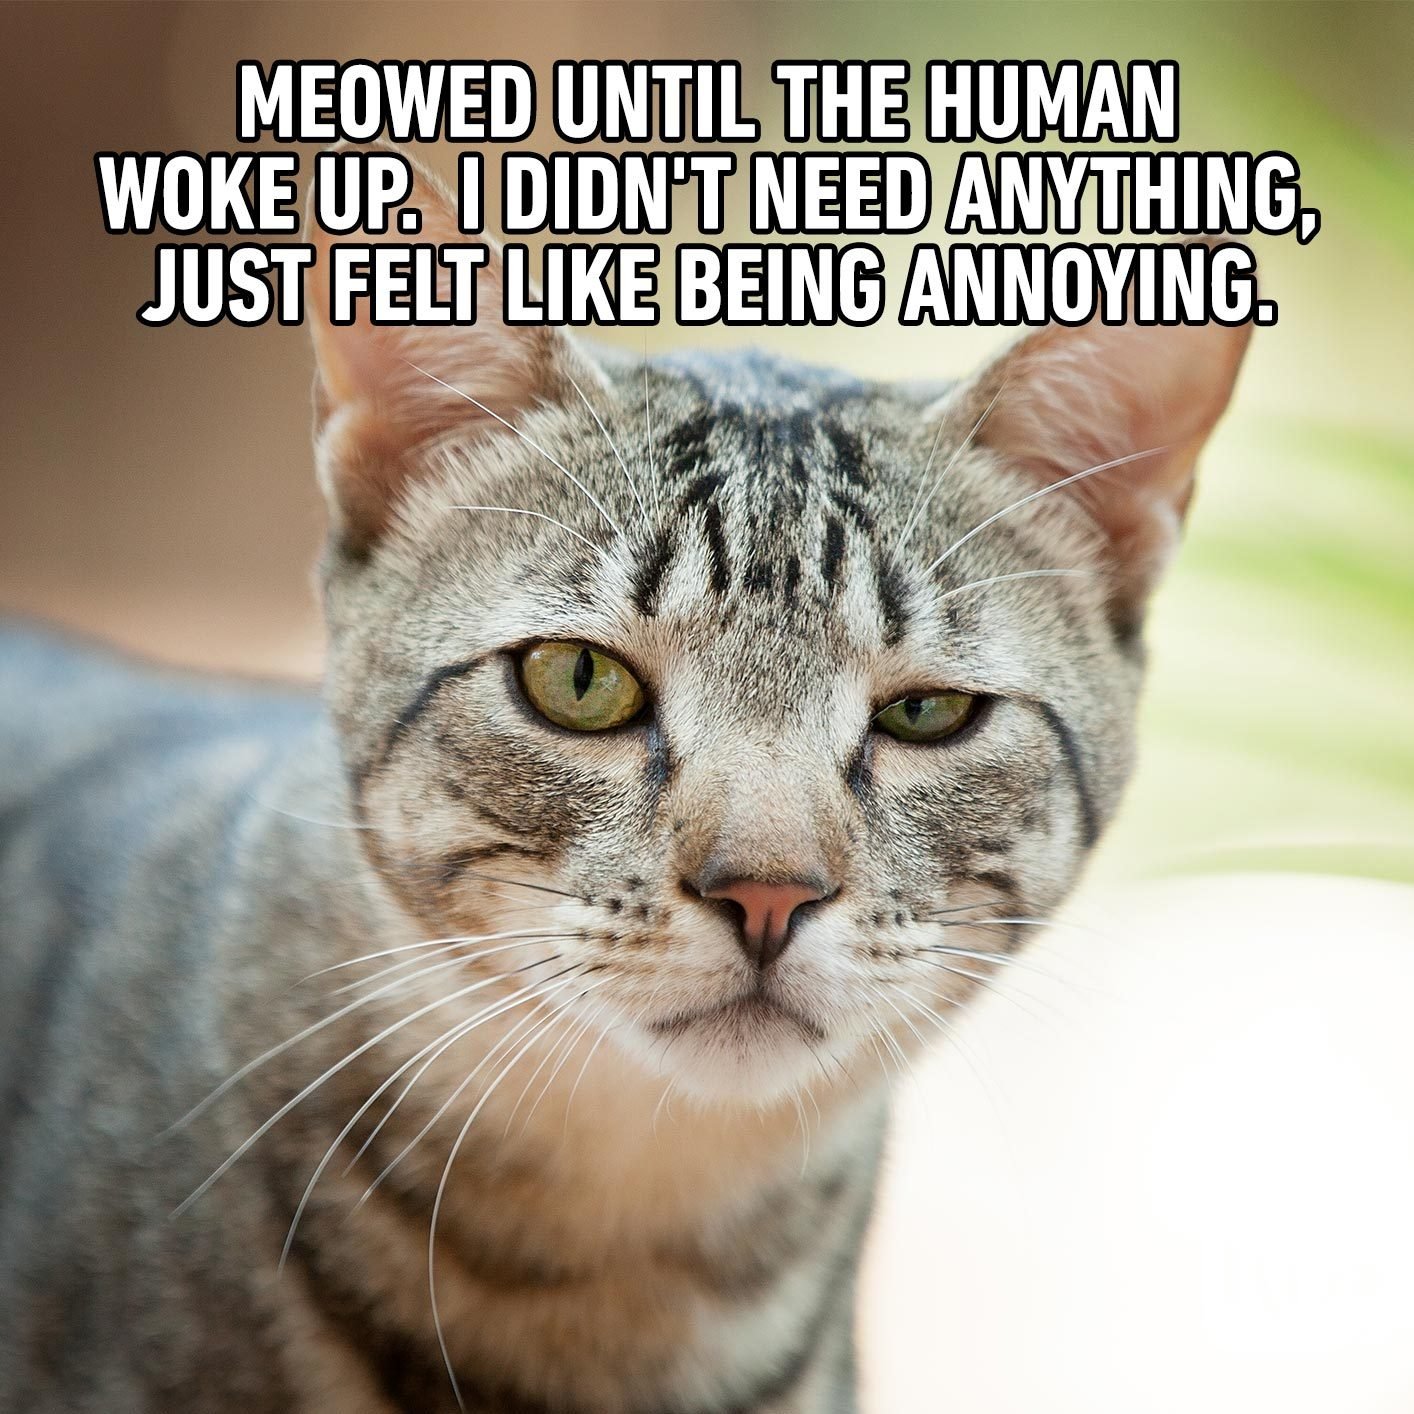 45 Cat Memes You'll Laugh at Every Time | Reader's Digest